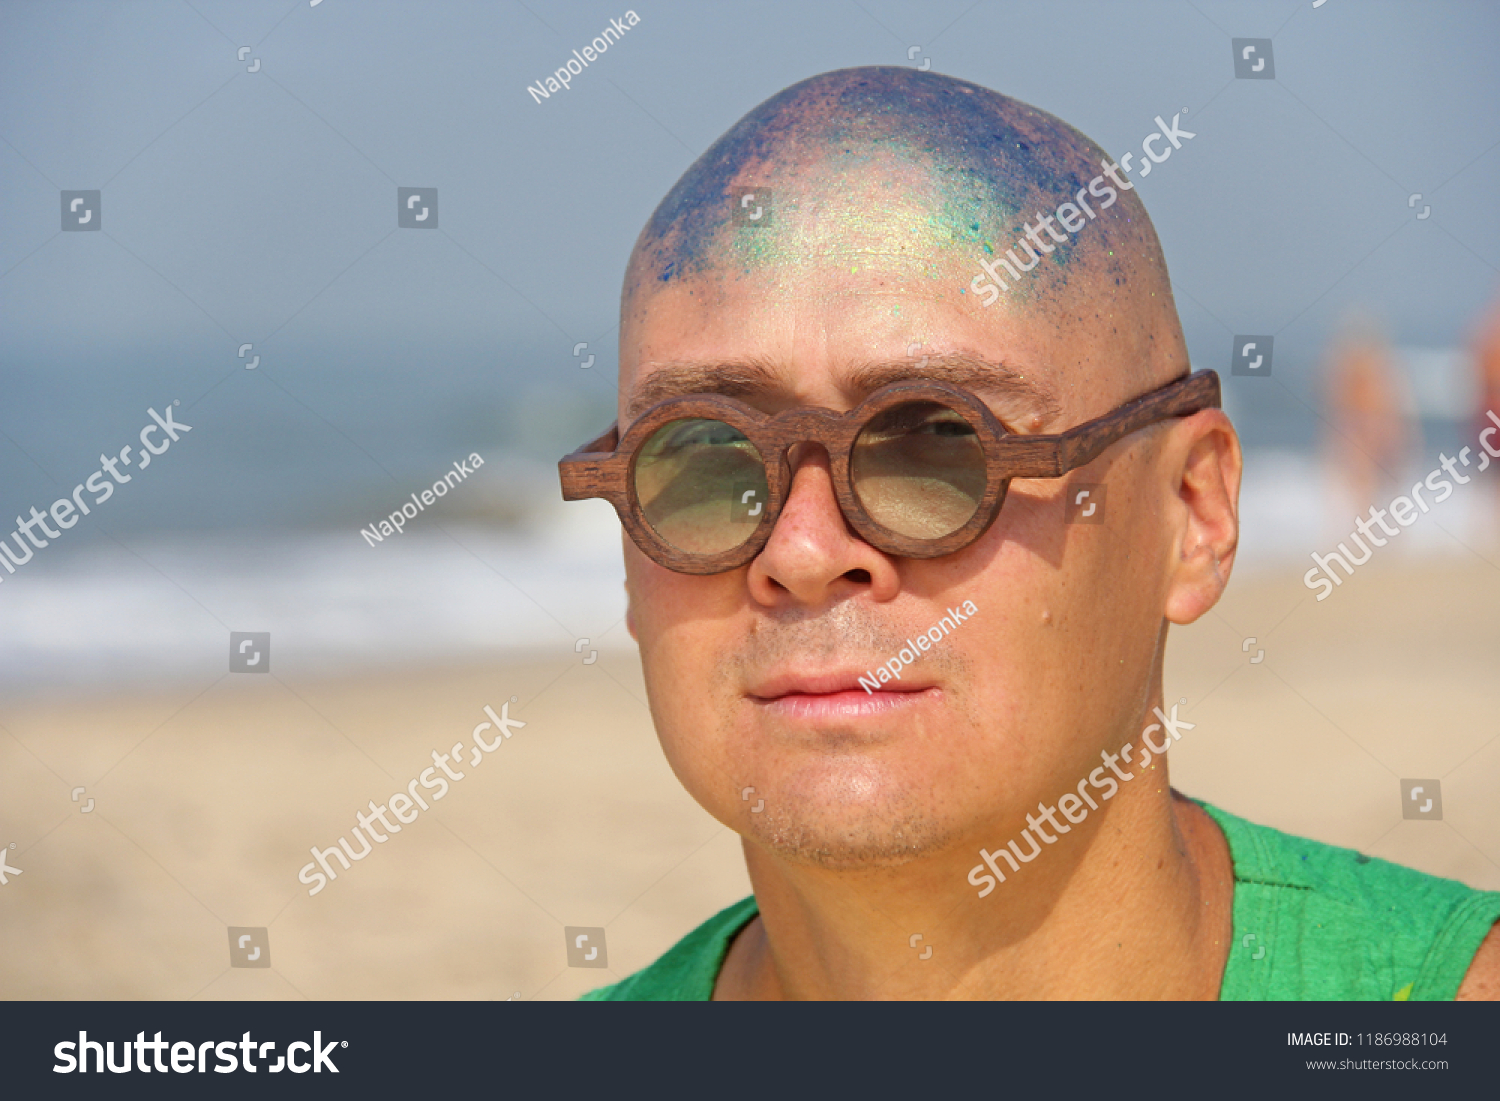 A bald and unusual young man, a freak, with a shiny bald head and round wooden glasses on the background of the beach and the sea. Humor and eccentricity. Unusual appearance. Humorist. unexpected. #1186988104